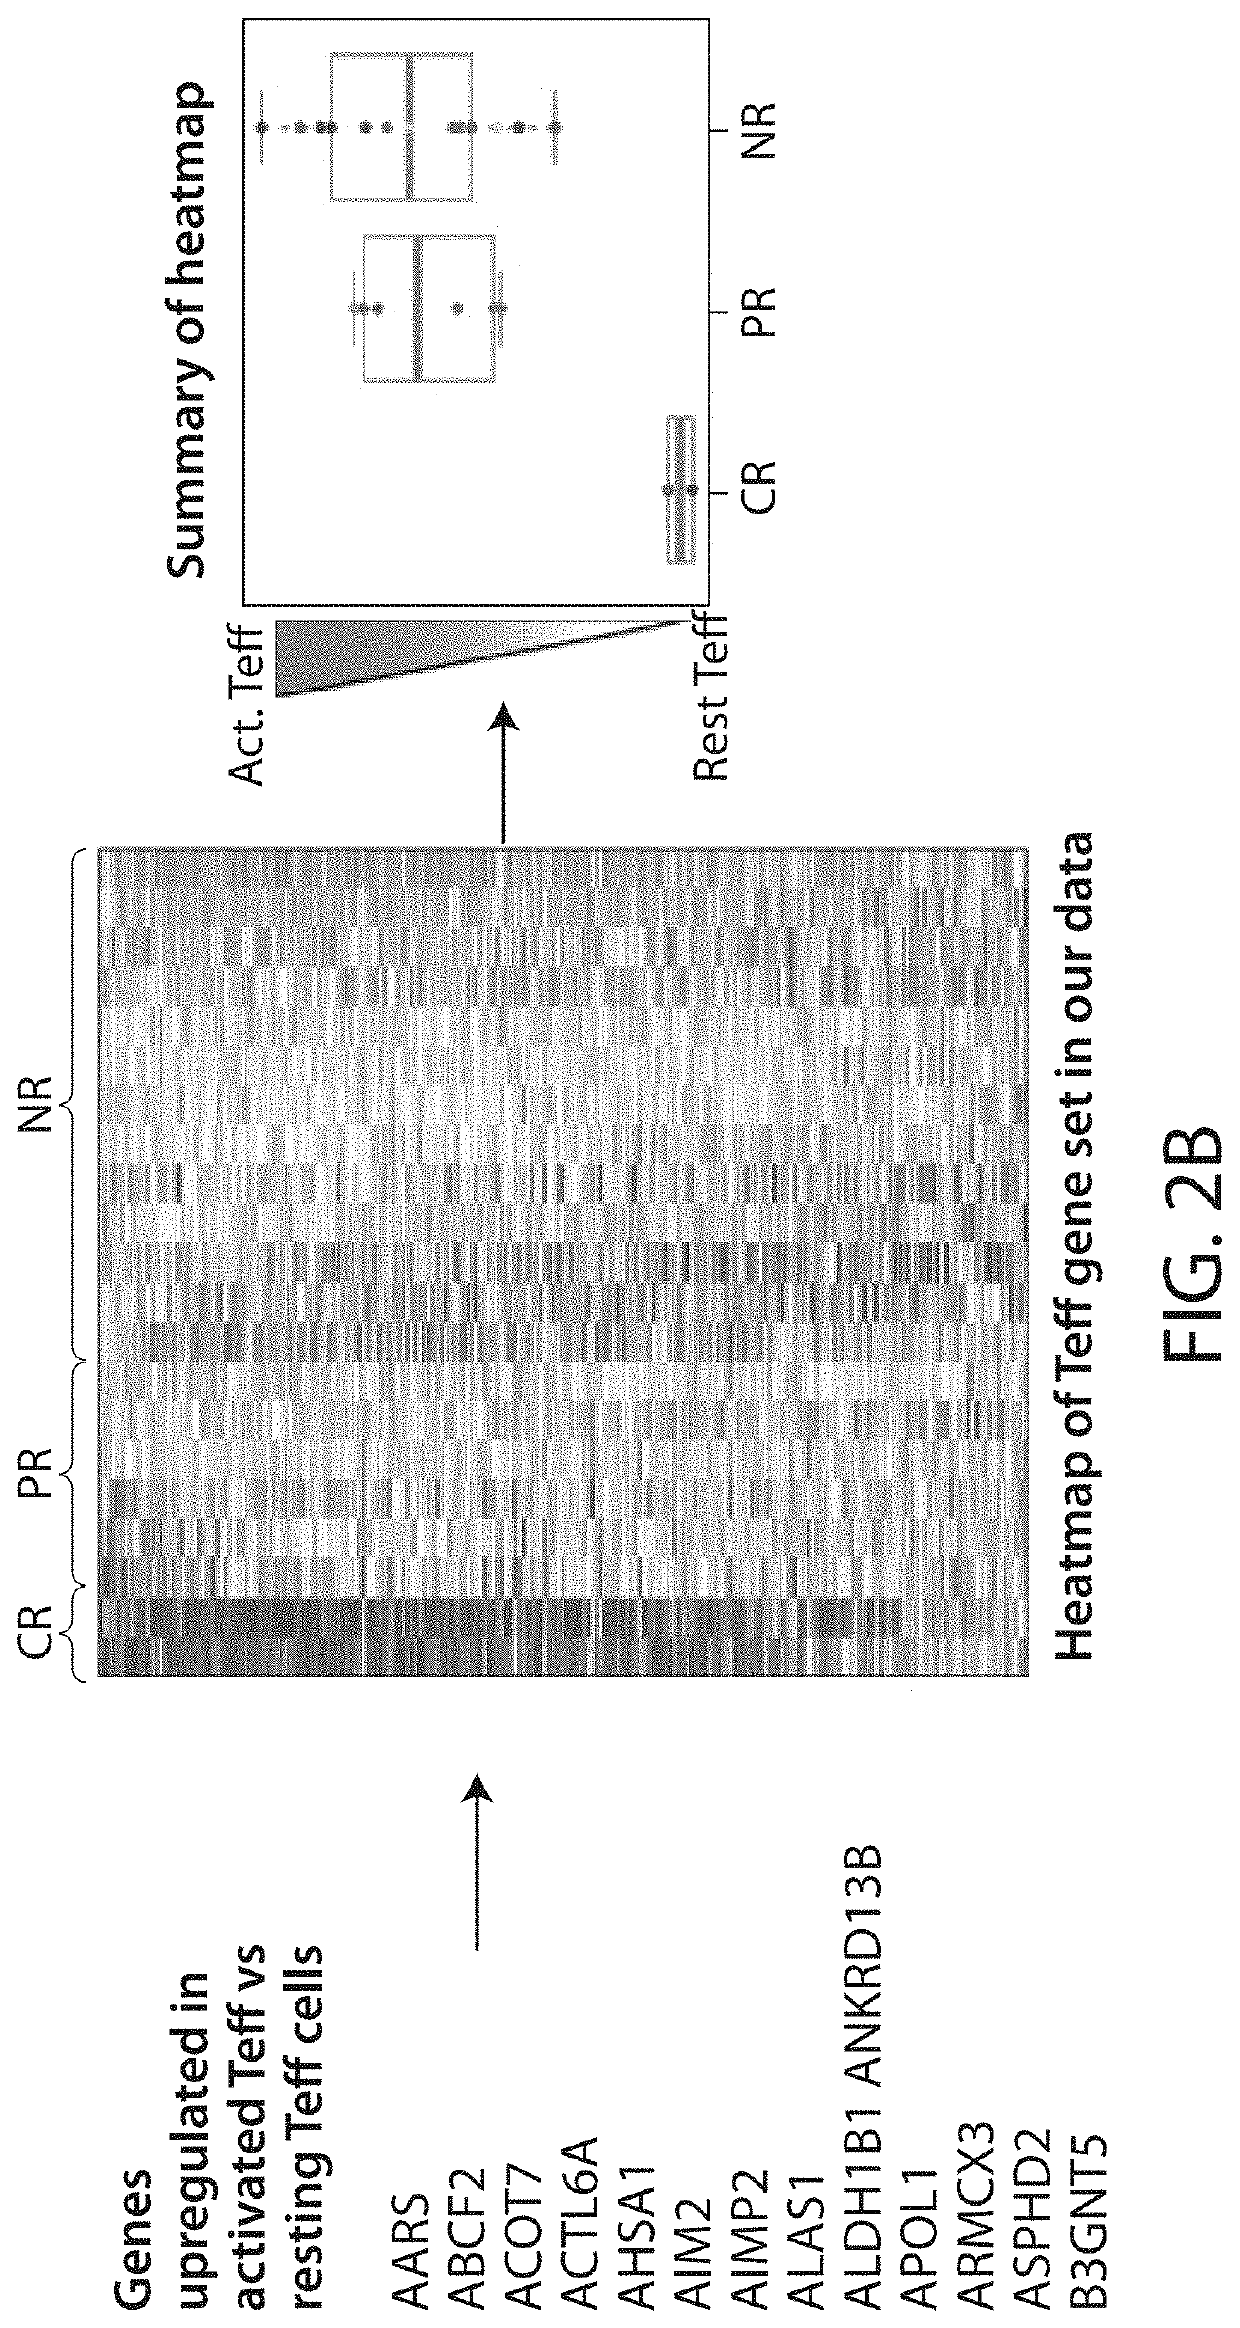 Biomarkers predictive of therapeutic responsiveness to chimeric antigen receptor therapy and uses thereof